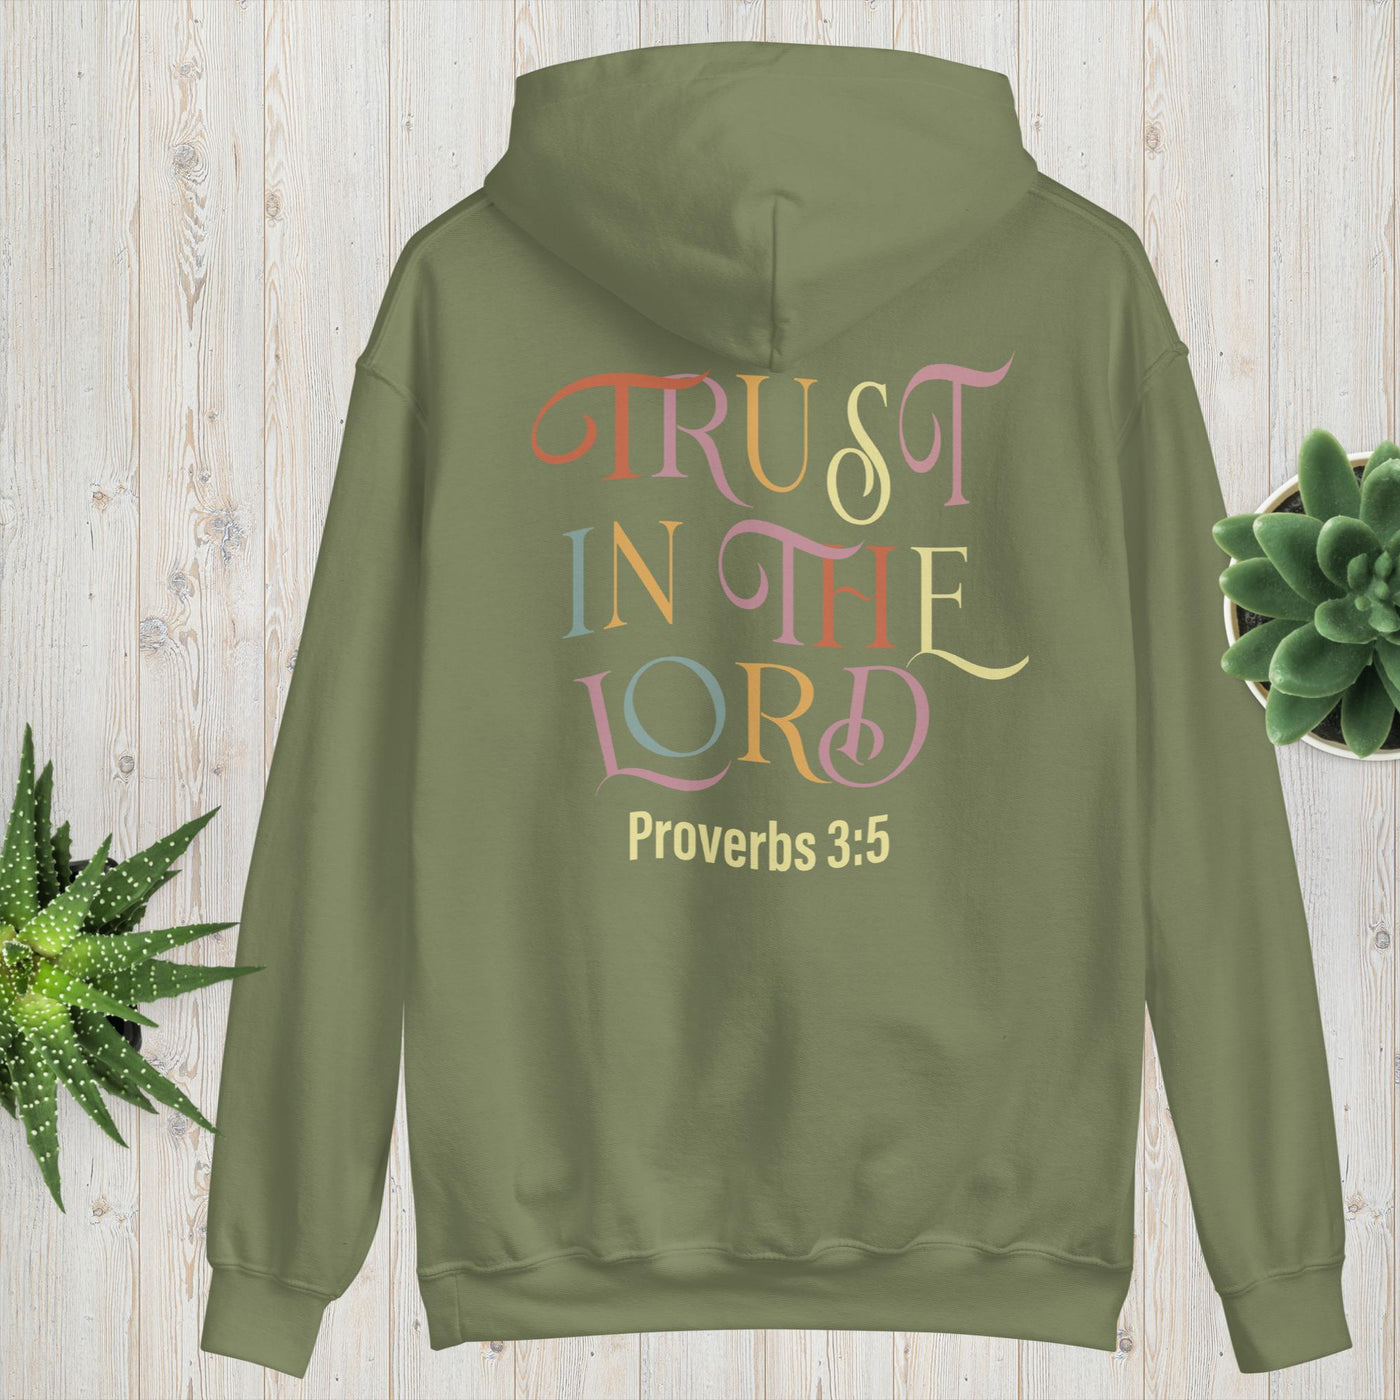 F&H Trust In The Lord Two Sided Hoodie